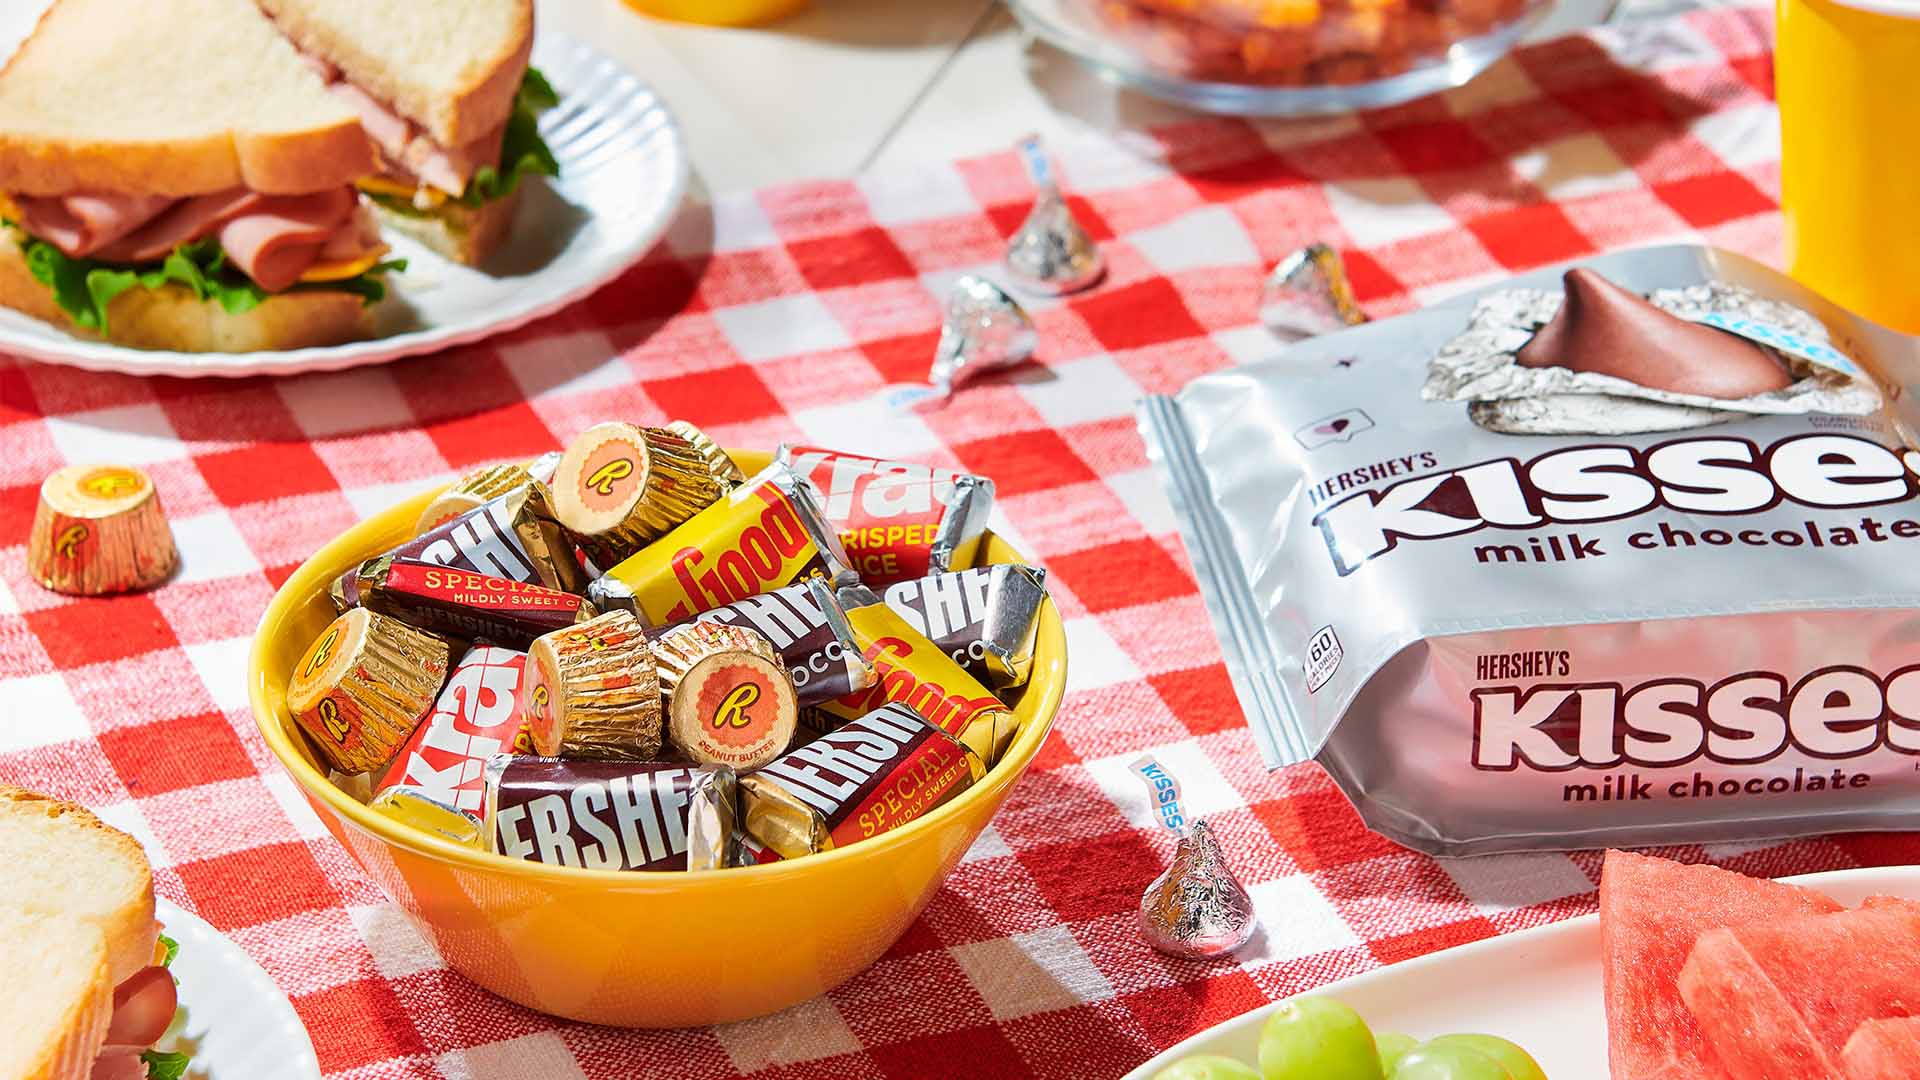 picnic table spread with assorted hersheys candy and sandwiches